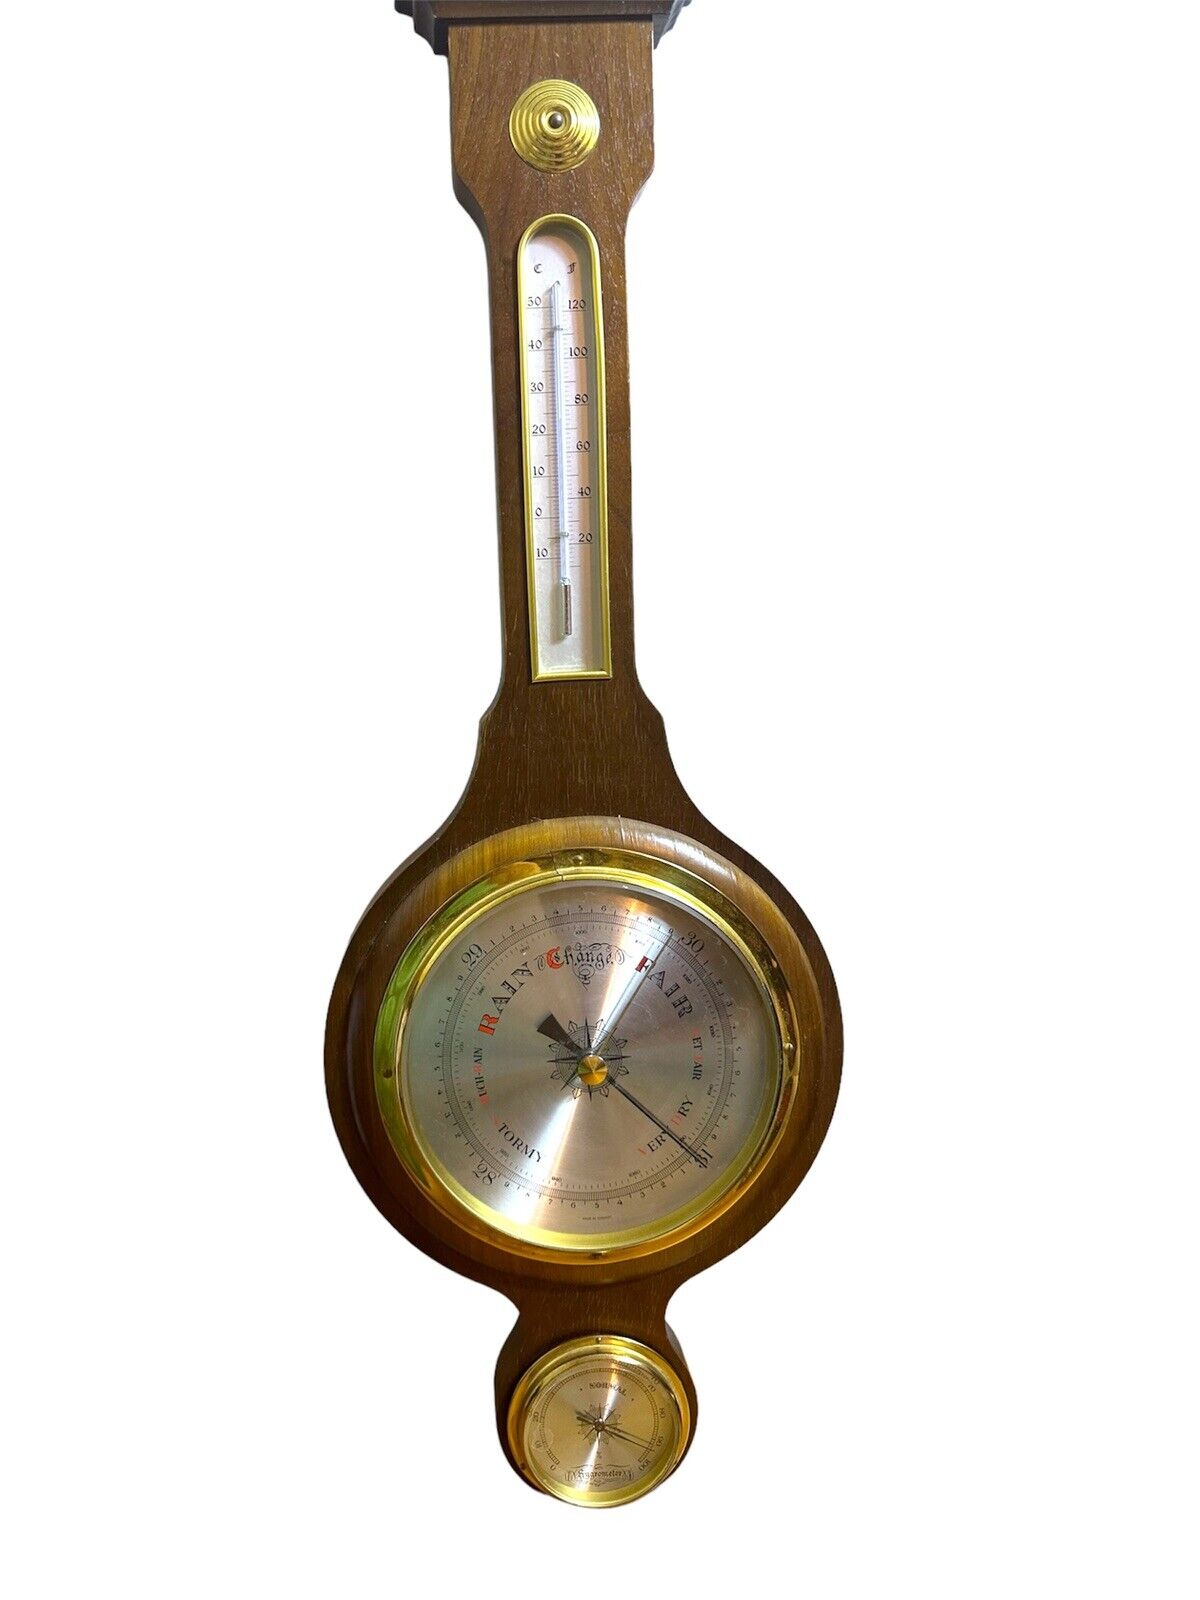 Vintage Thermometer Barometer Weather Station Made in Germany, Room Decor